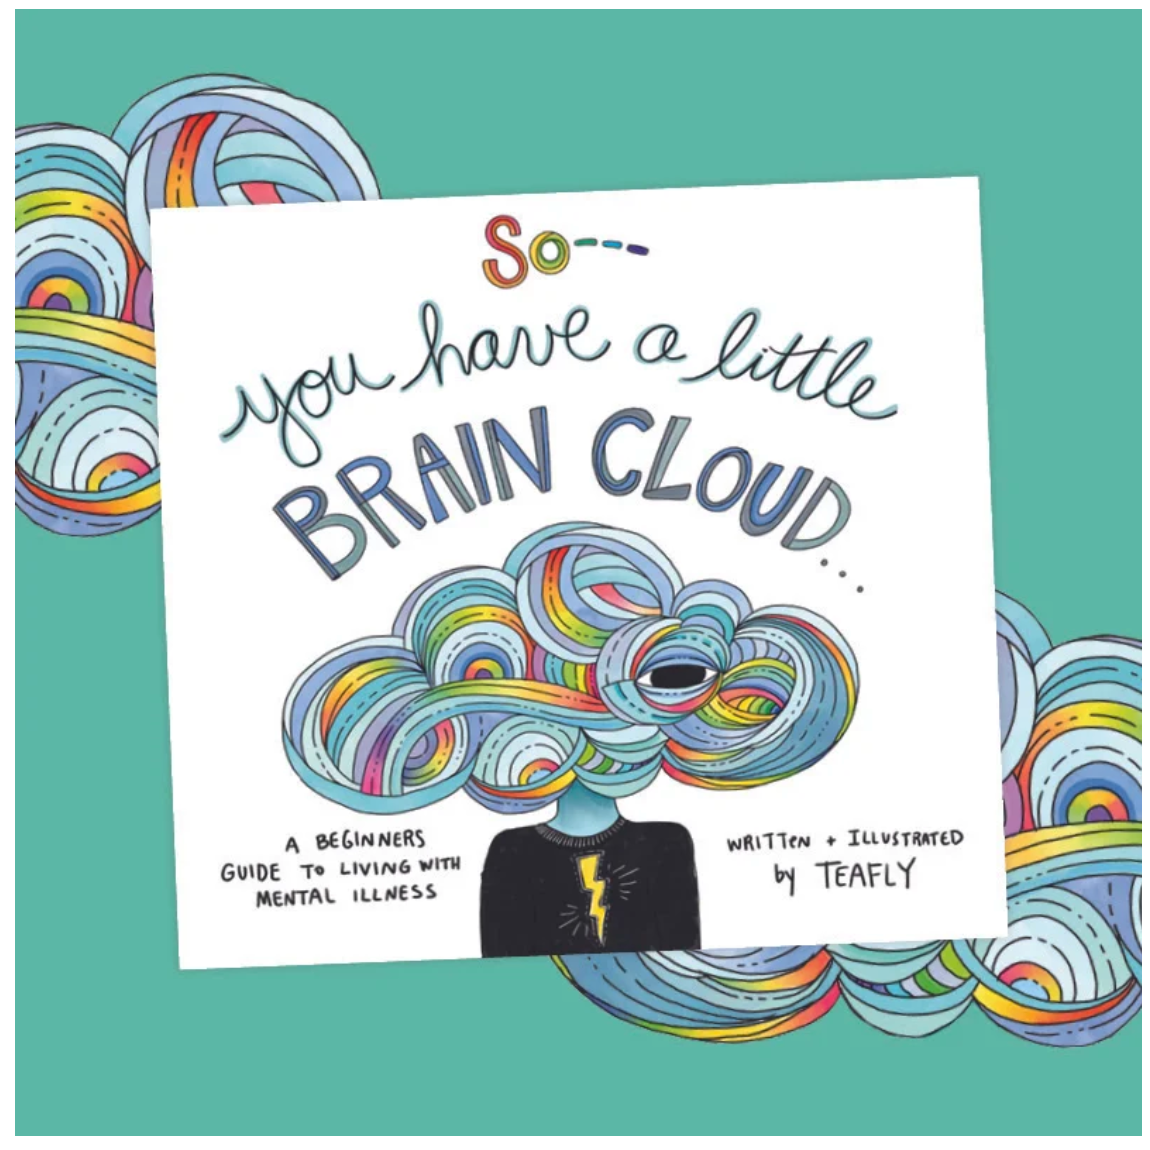 So... you have a little Brain Cloud...A beginners guide to living with mental illness